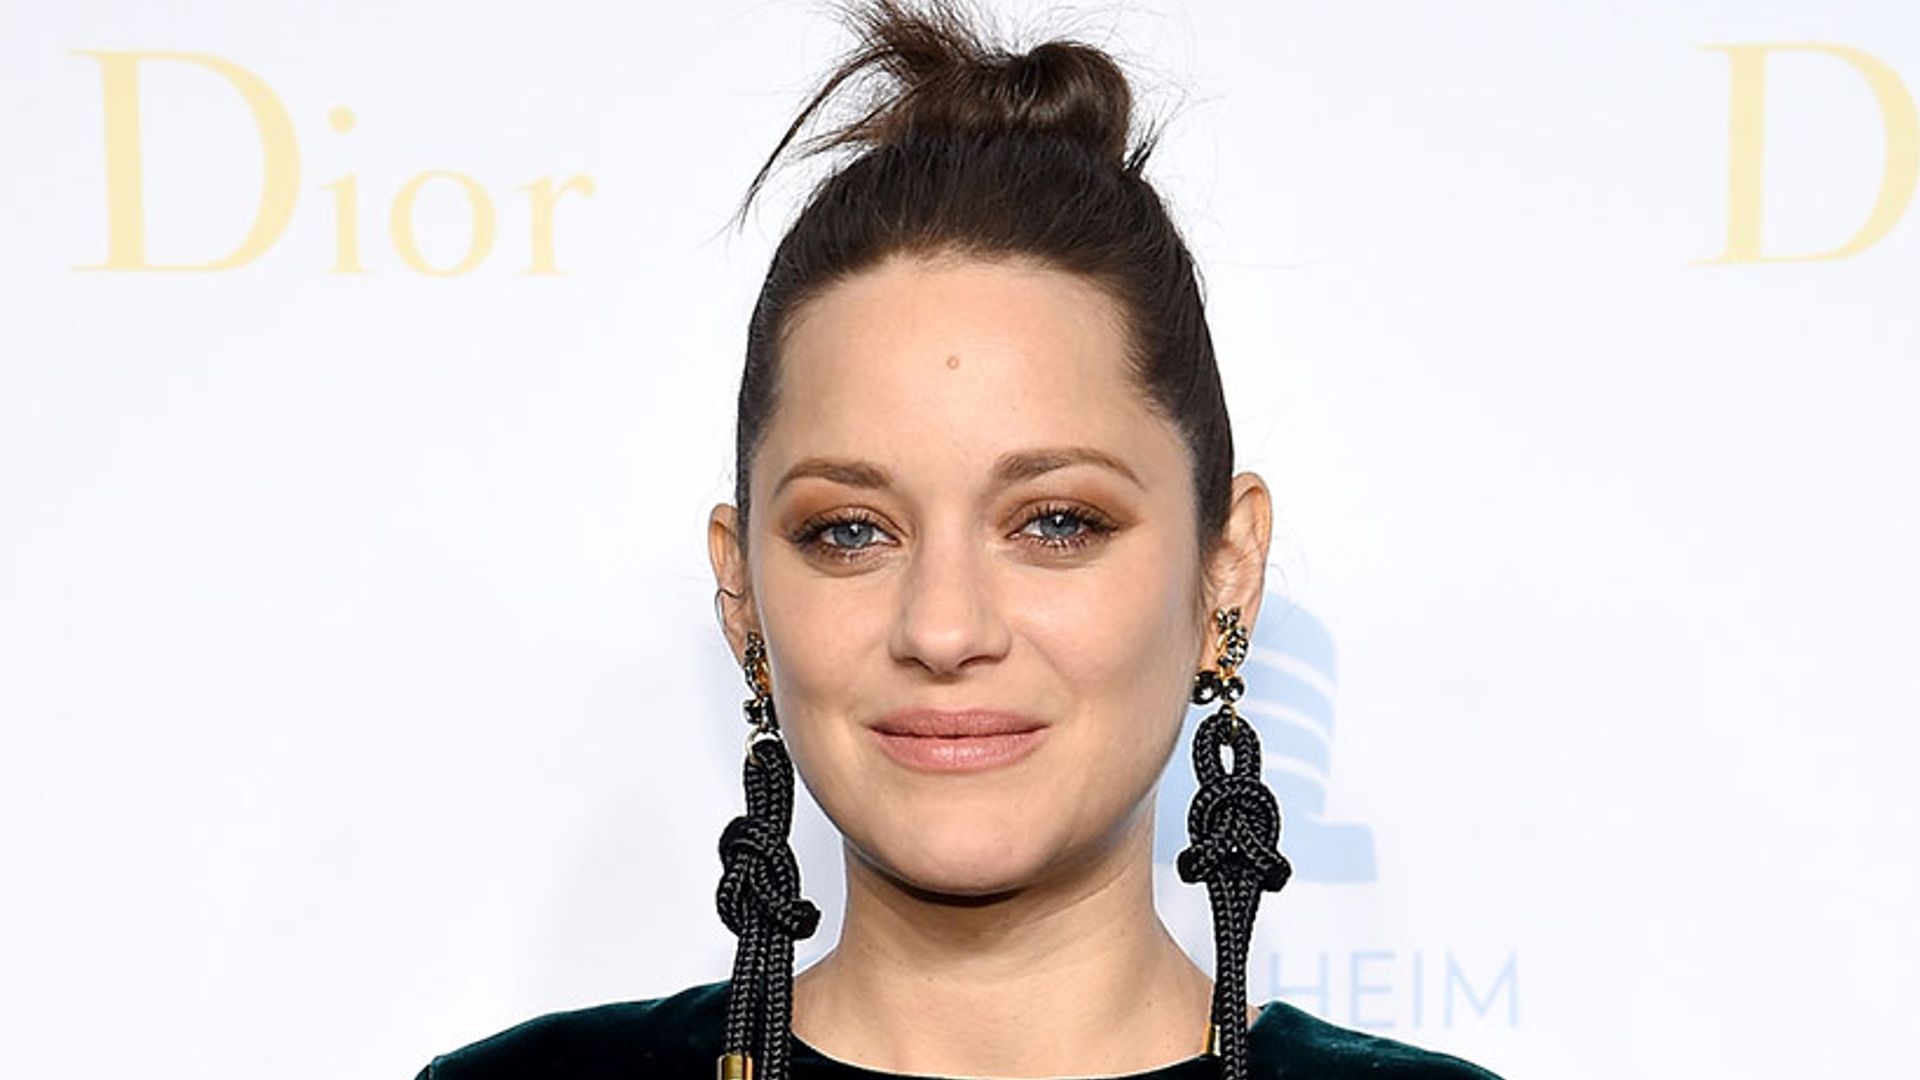 Marion Cotillard discusses Brad Pitt affair rumours: 'I never take anything personally'